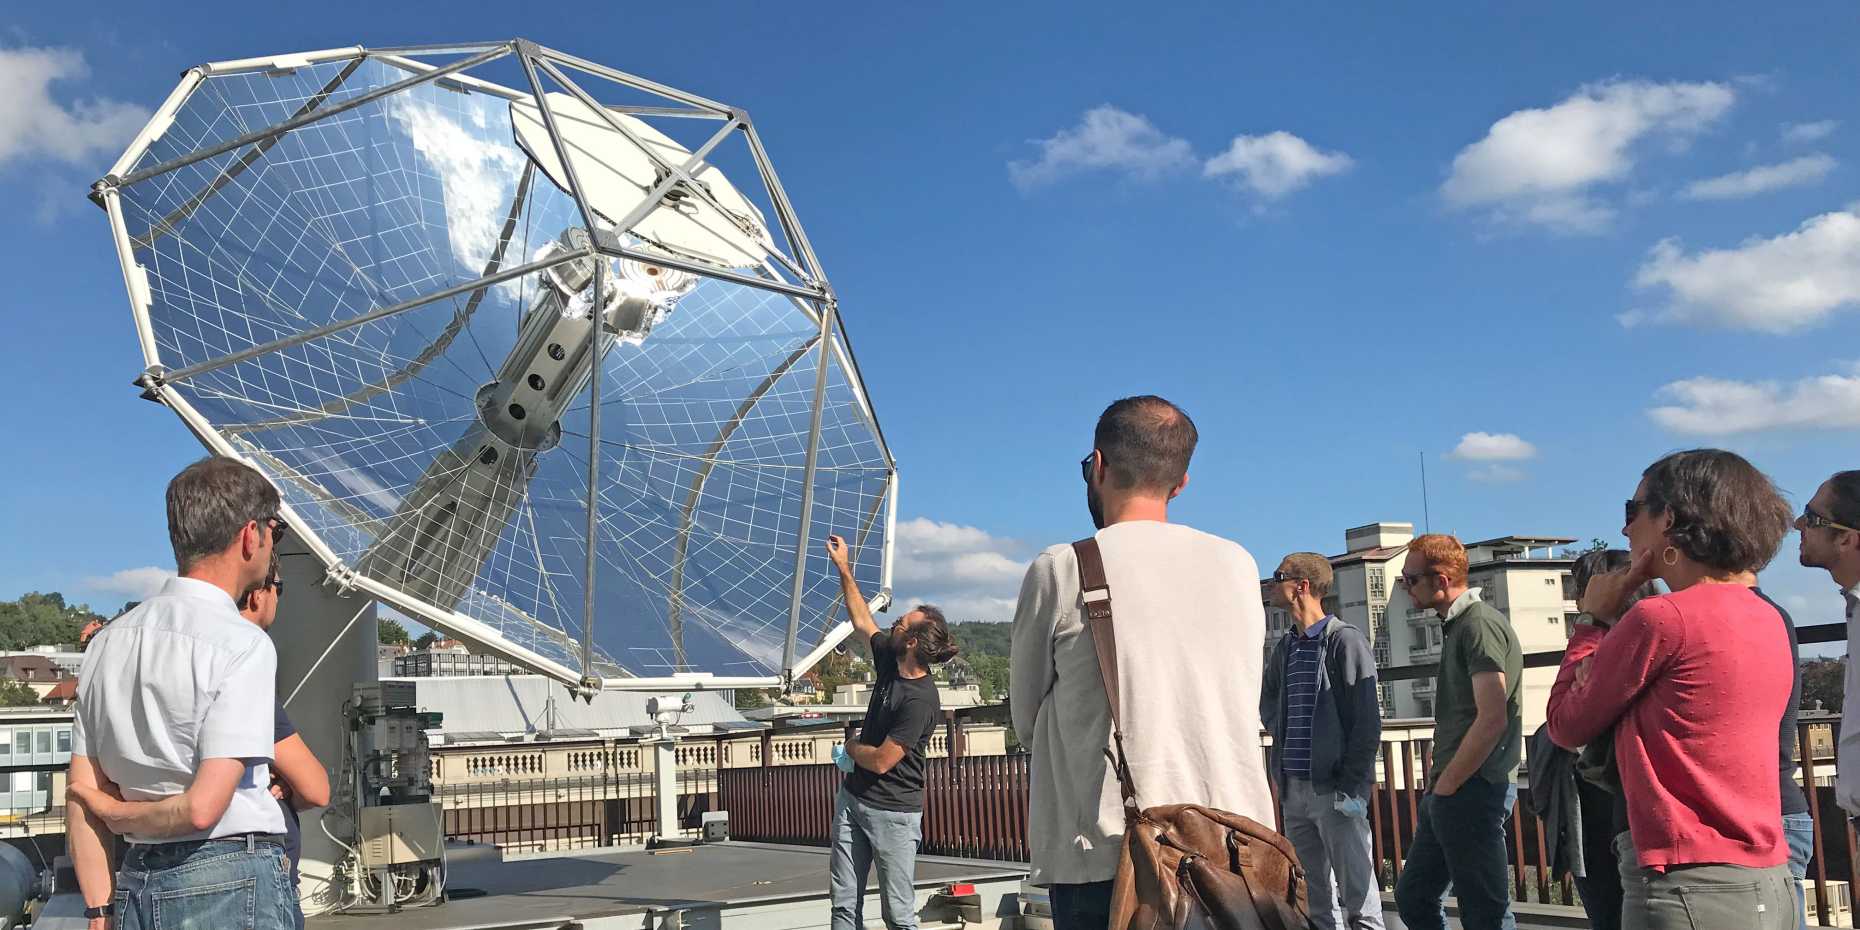 Continuing education students visit the solar reactor on the roof of an ETH building.